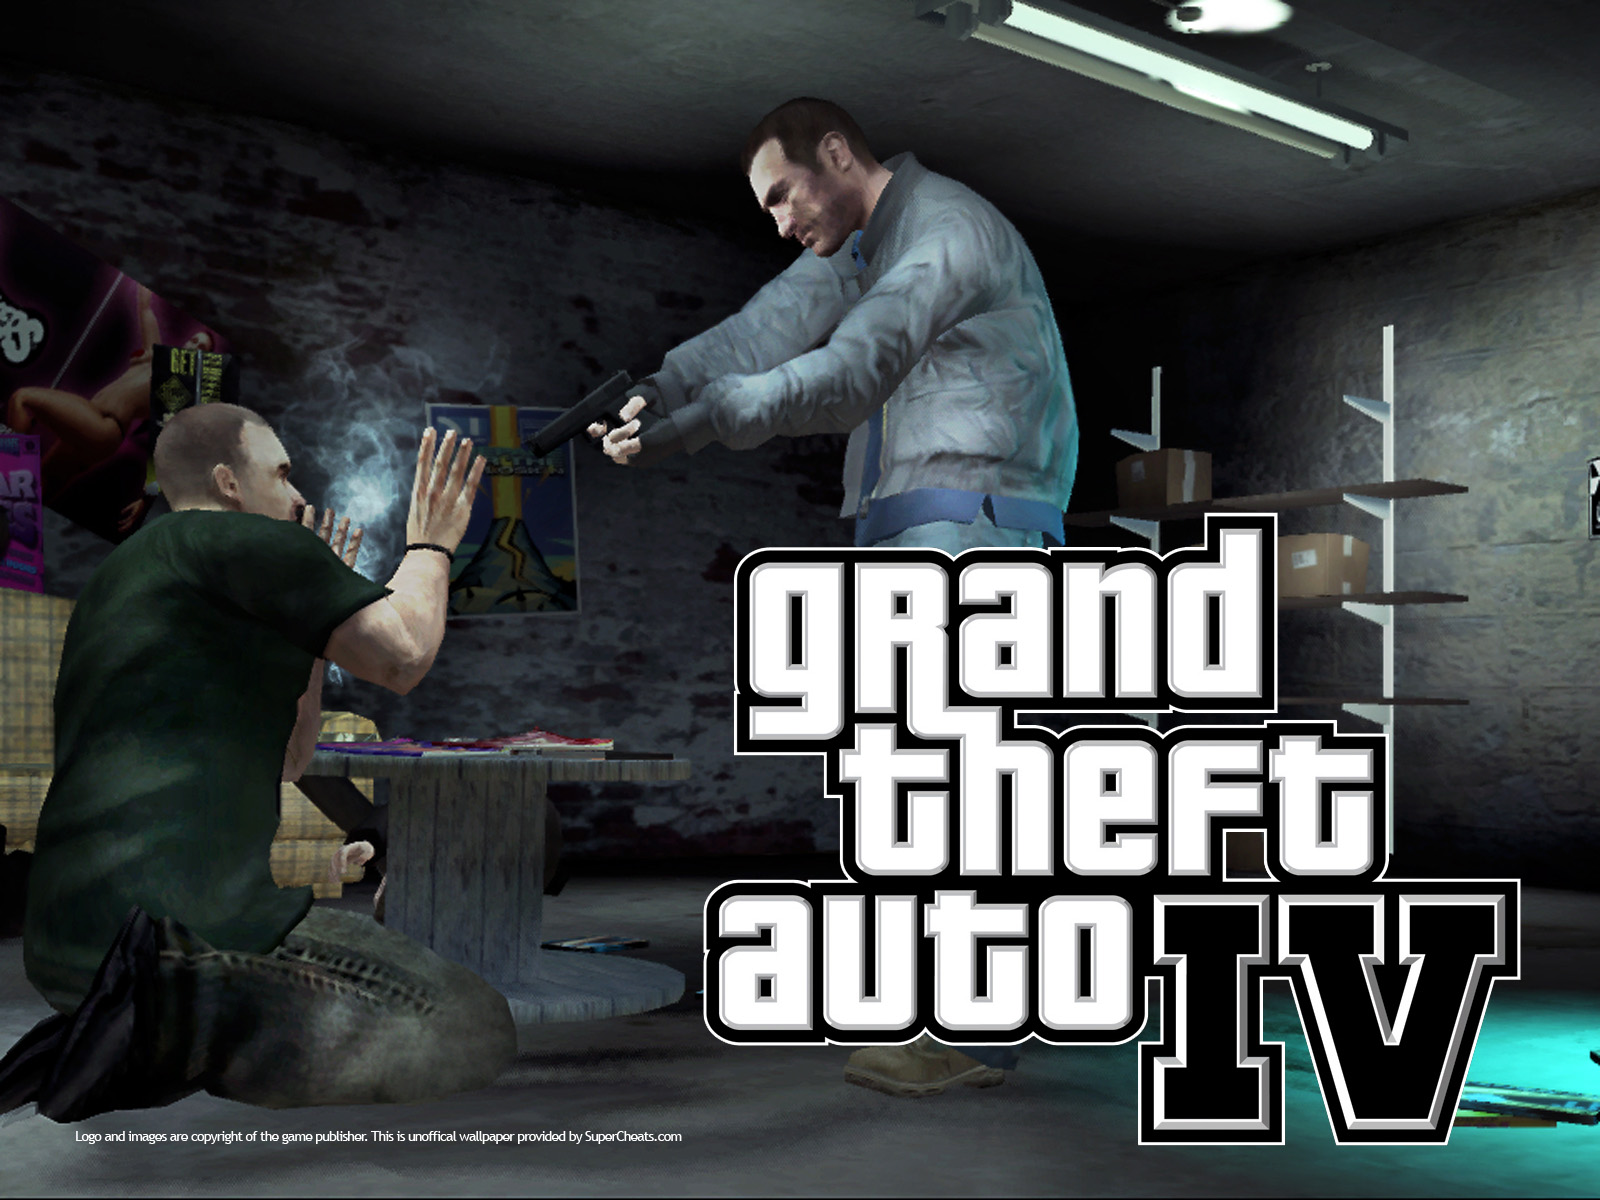 Grand Theft Auto 4 wallpapers Grand Theft Auto 4 2 Assassins Creed